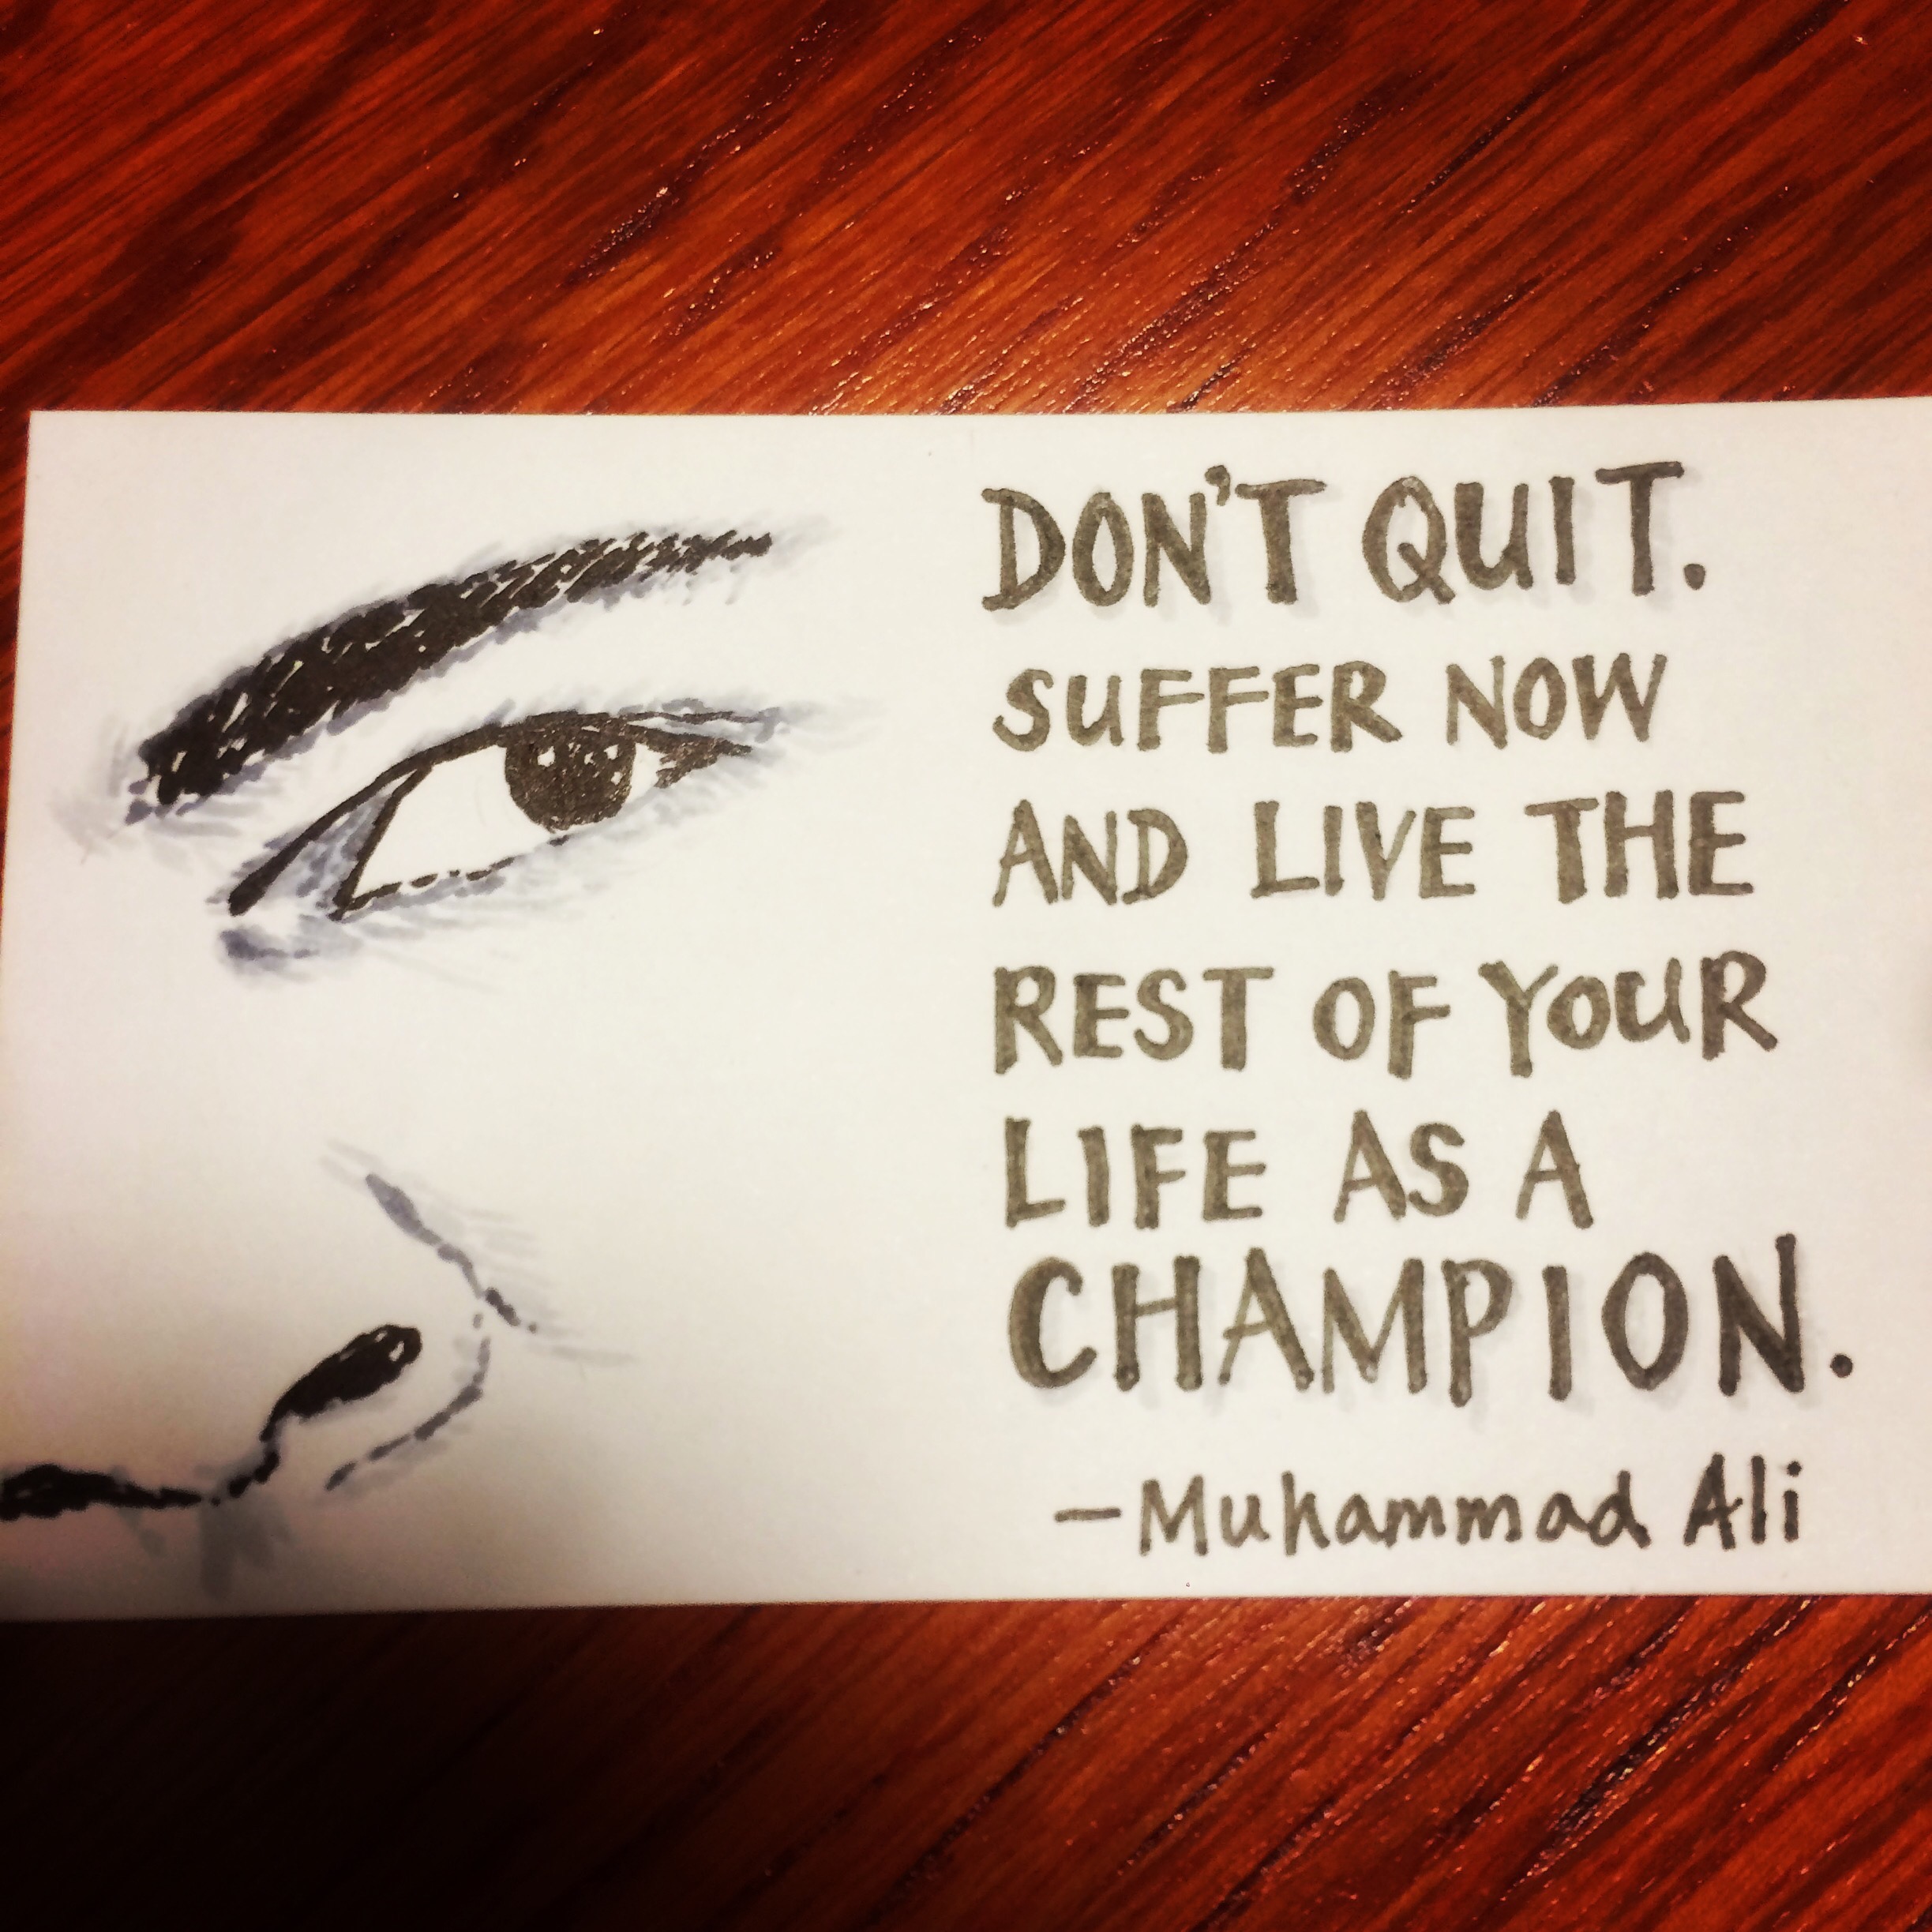 Don't quit. Suffer now and live the rest of your life as a champion.